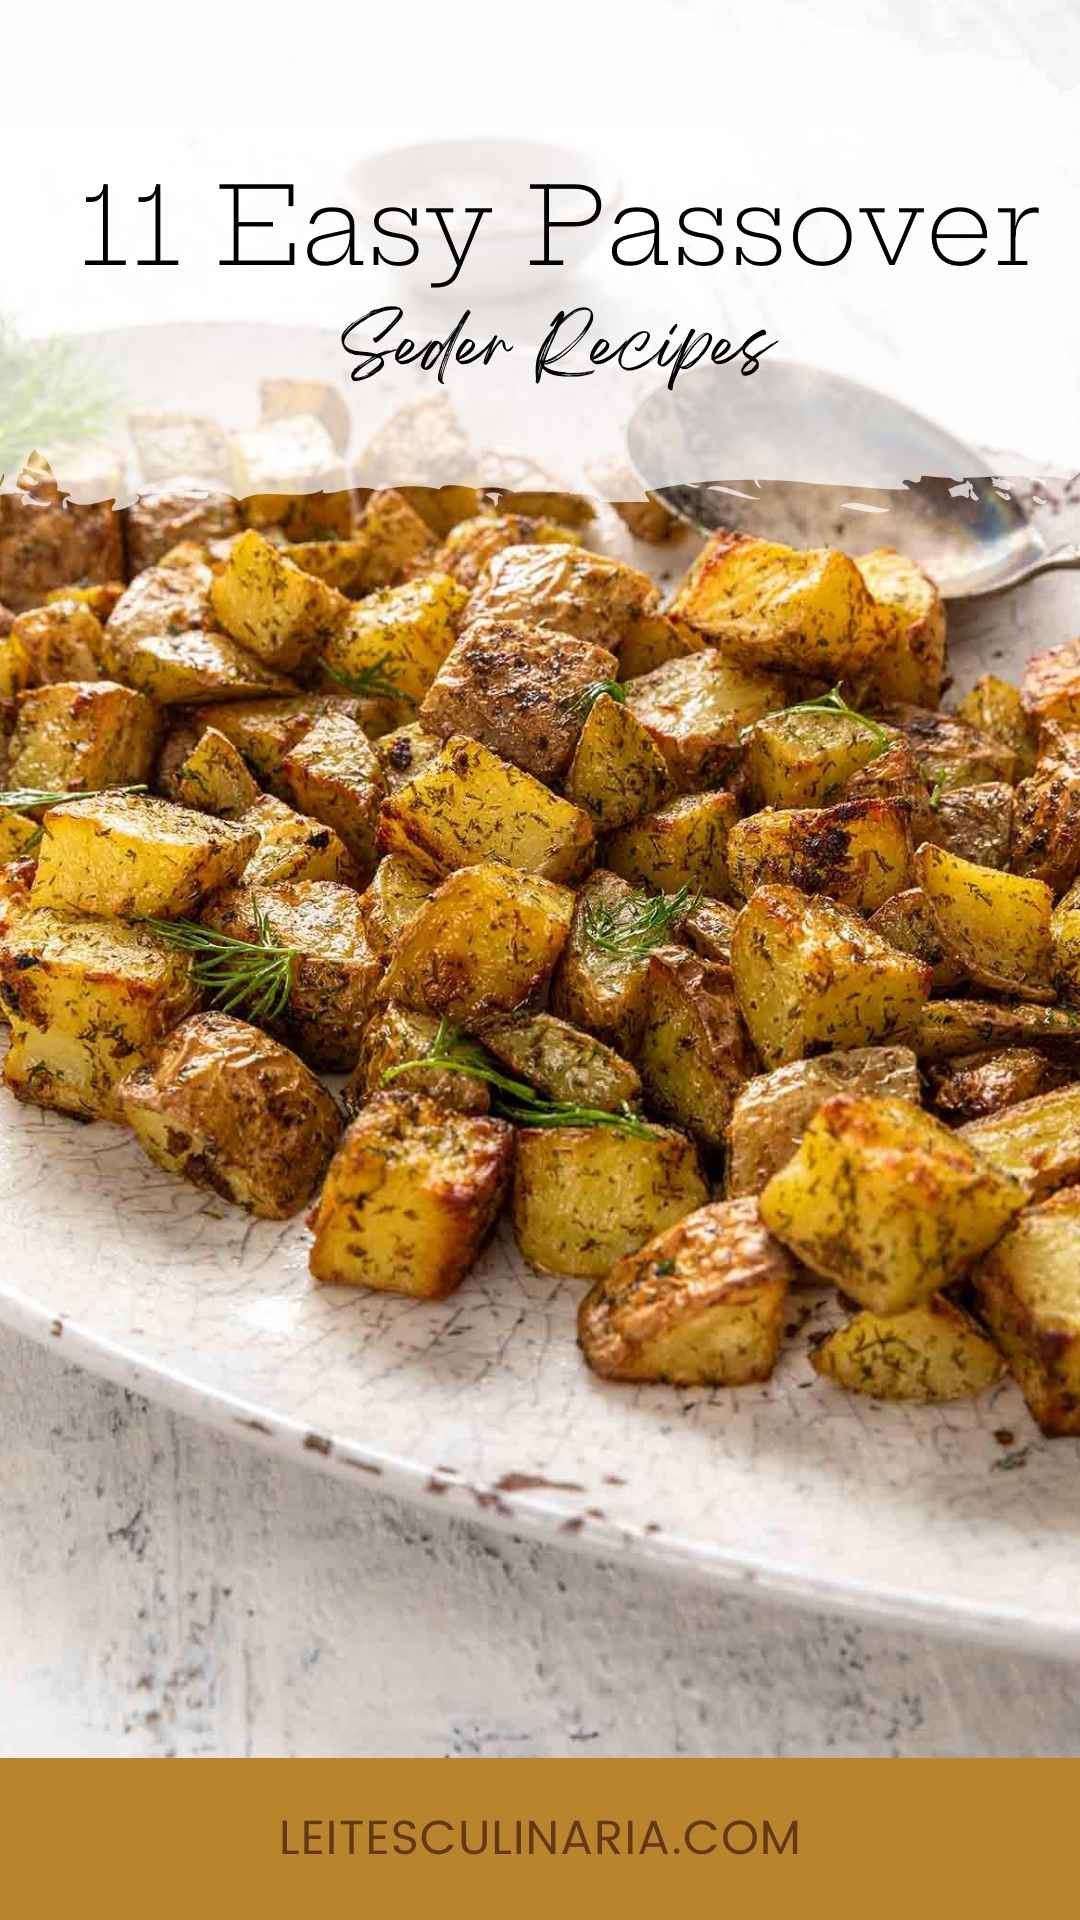 A platter of roasted potatoes garnished with dill.